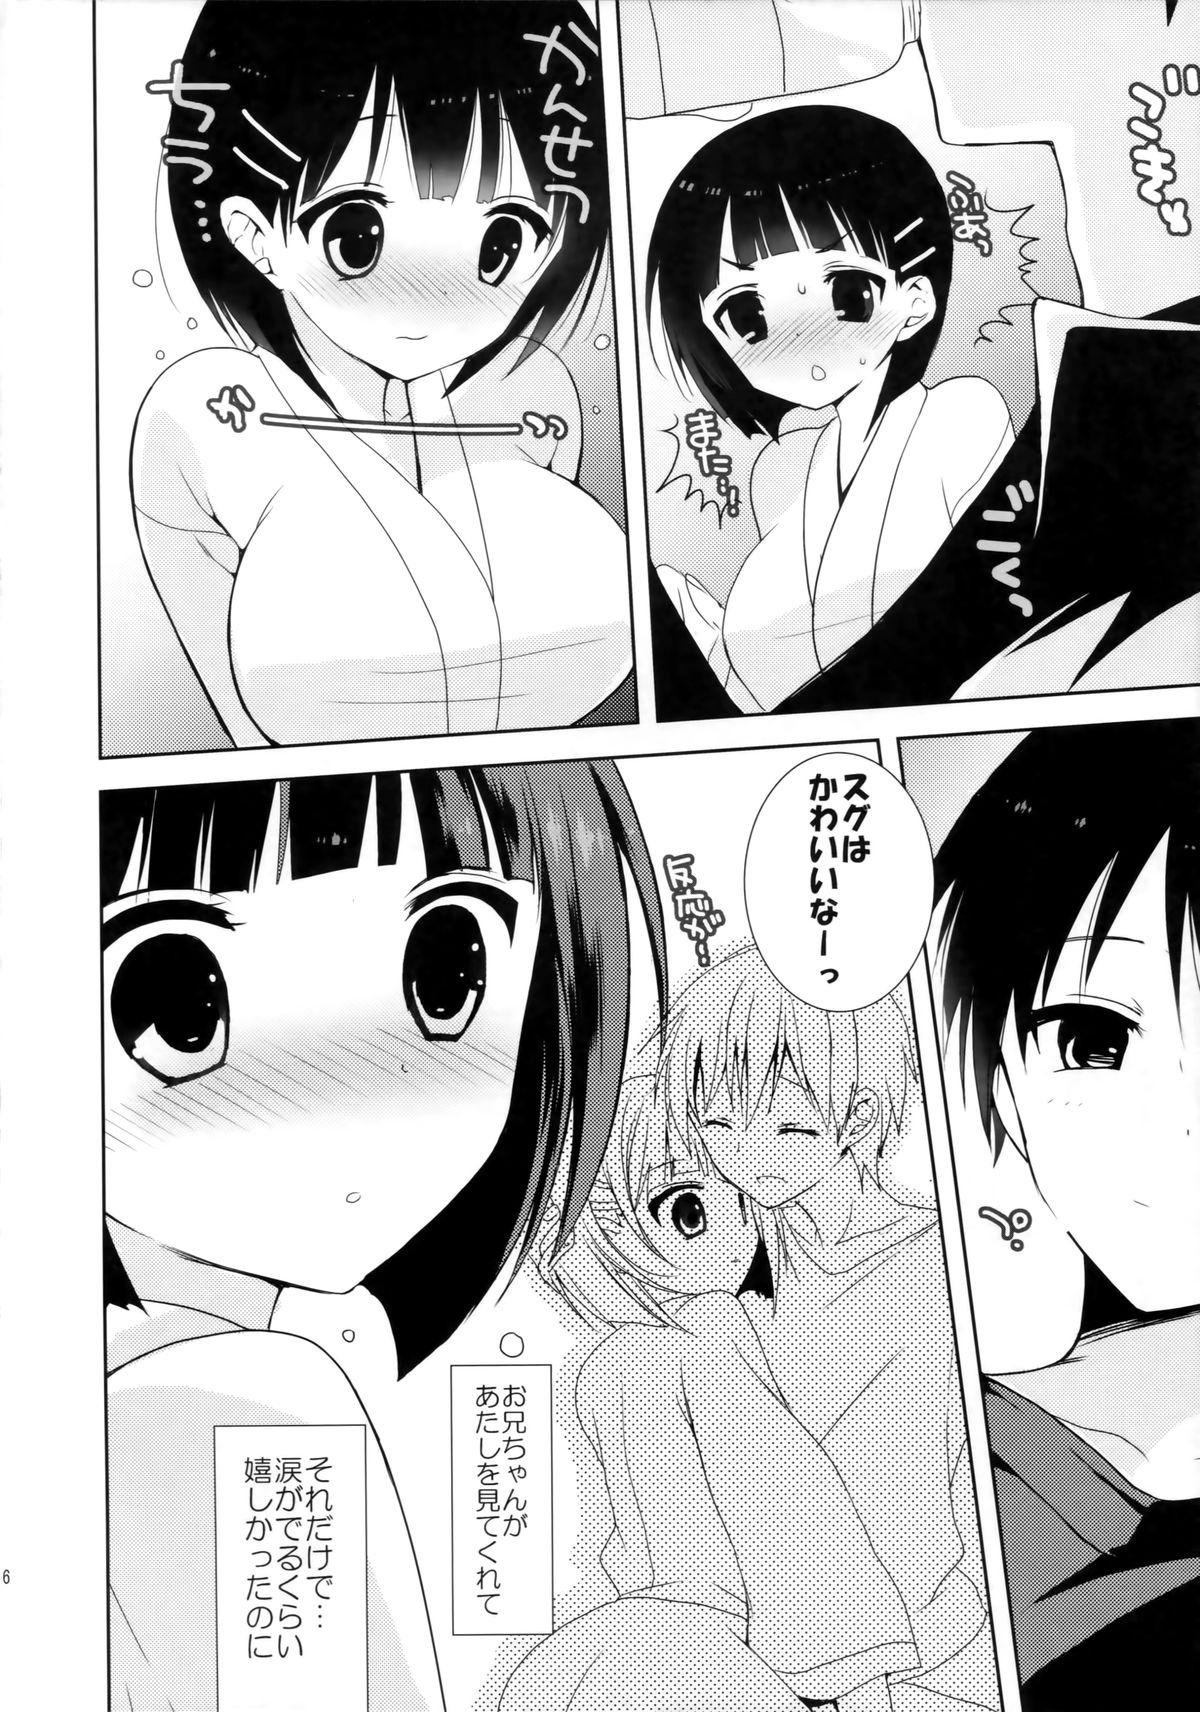 Family Roleplay Chichikuri Online - Sword art online Pussy To Mouth - Page 4